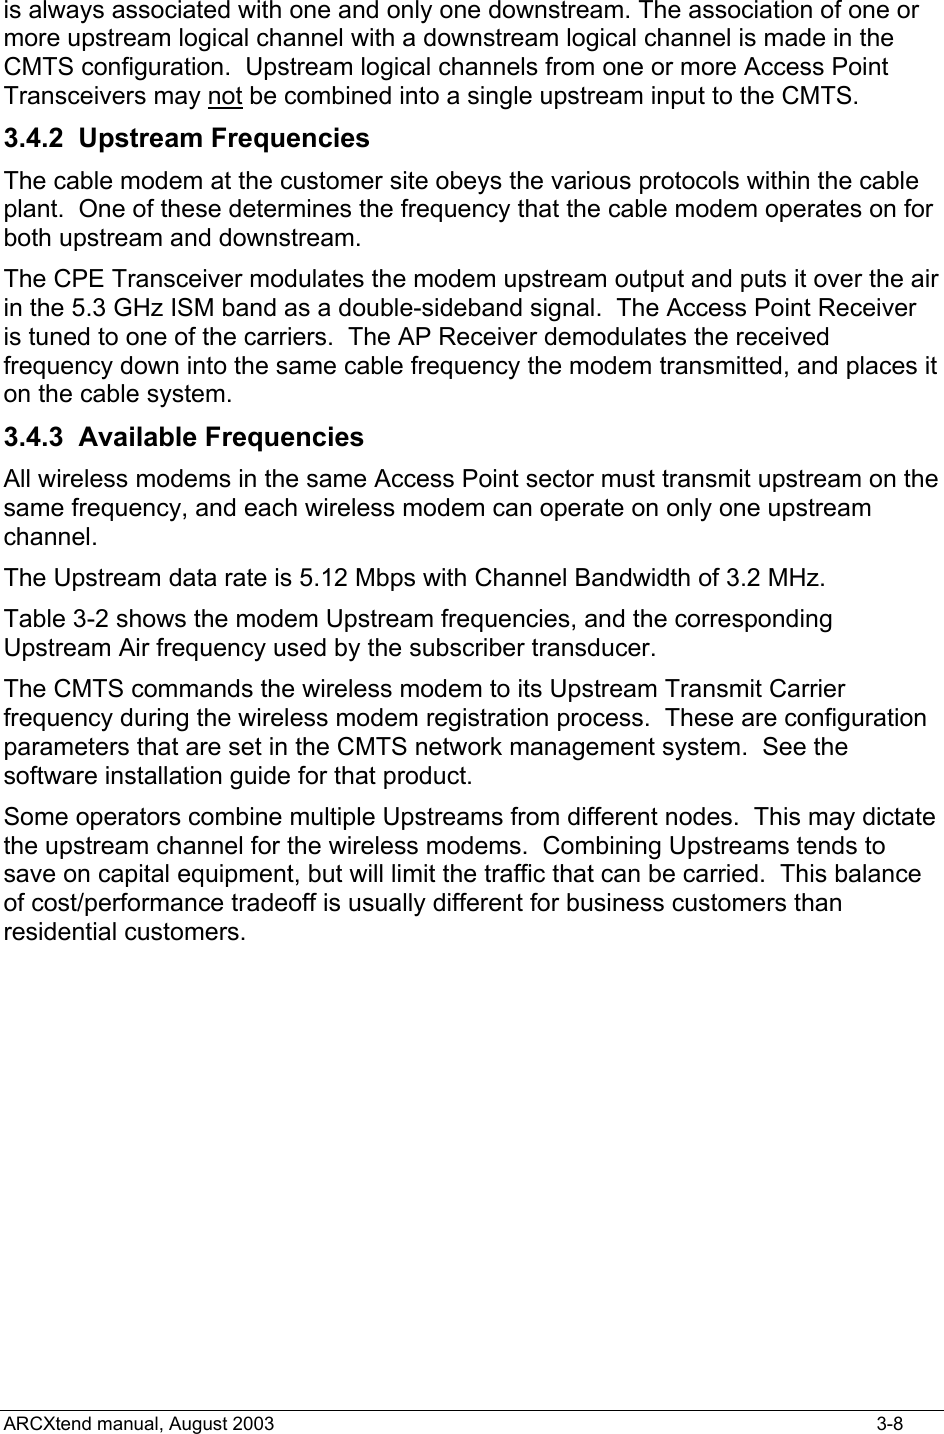  is always associated with one and only one downstream. The association of one or more upstream logical channel with a downstream logical channel is made in the CMTS configuration.  Upstream logical channels from one or more Access Point Transceivers may not be combined into a single upstream input to the CMTS. 3.4.2 Upstream Frequencies The cable modem at the customer site obeys the various protocols within the cable plant.  One of these determines the frequency that the cable modem operates on for both upstream and downstream. The CPE Transceiver modulates the modem upstream output and puts it over the air in the 5.3 GHz ISM band as a double-sideband signal.  The Access Point Receiver is tuned to one of the carriers.  The AP Receiver demodulates the received frequency down into the same cable frequency the modem transmitted, and places it on the cable system. 3.4.3 Available Frequencies All wireless modems in the same Access Point sector must transmit upstream on the same frequency, and each wireless modem can operate on only one upstream channel. The Upstream data rate is 5.12 Mbps with Channel Bandwidth of 3.2 MHz.    Table 3-2 shows the modem Upstream frequencies, and the corresponding Upstream Air frequency used by the subscriber transducer.   The CMTS commands the wireless modem to its Upstream Transmit Carrier frequency during the wireless modem registration process.  These are configuration parameters that are set in the CMTS network management system.  See the software installation guide for that product.   Some operators combine multiple Upstreams from different nodes.  This may dictate the upstream channel for the wireless modems.  Combining Upstreams tends to save on capital equipment, but will limit the traffic that can be carried.  This balance of cost/performance tradeoff is usually different for business customers than residential customers.  ARCXtend manual, August 2003    3-8 